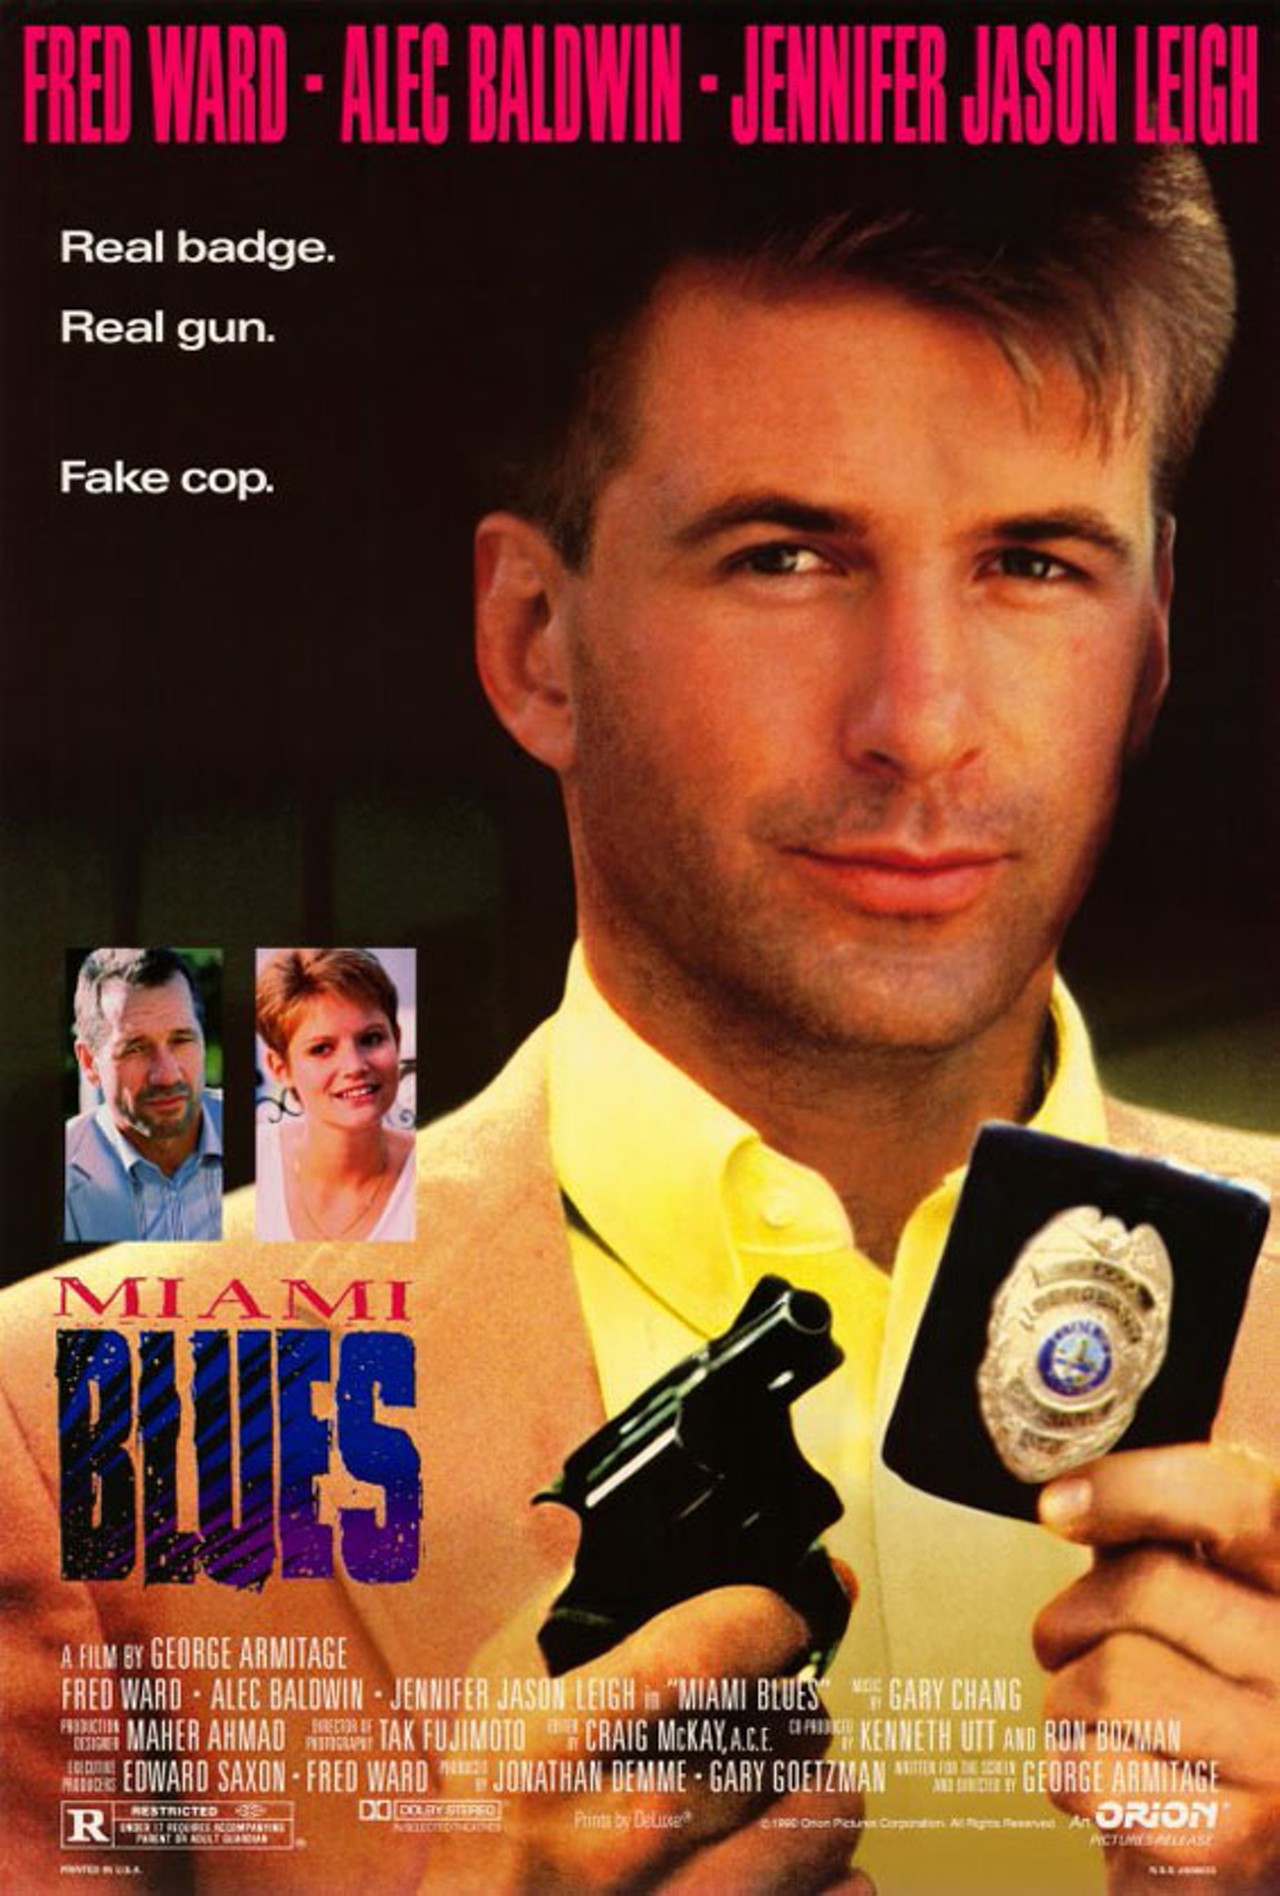 Miami Blues (1990)
Based on the late Charles Willeford's series of hard-boiled crime novels featuring Miami cop Hoke Moseley, the Jonathan Demme-produced Miami Blues opens with the prison release of Frederick Frenger Jr. (Alec Baldwin), a deranged killer who has barely de-boarded his plane before he's killed a Hare Krishna in the airport. Checking into his hotel, Frenger meets up with Susie Waggoner (Jennifer Jason Leigh), a young prostitute with dreams of domestic life, and the two quickly become romantically involved. Meanwhile, the Hare Krishna murder case is given to Moseley (Fred Ward), a grizzled vet who vows to hunt down Frenger, but may be getting too long in the tooth for the demands of his job.- Matthew Tobey, All Movie Guide